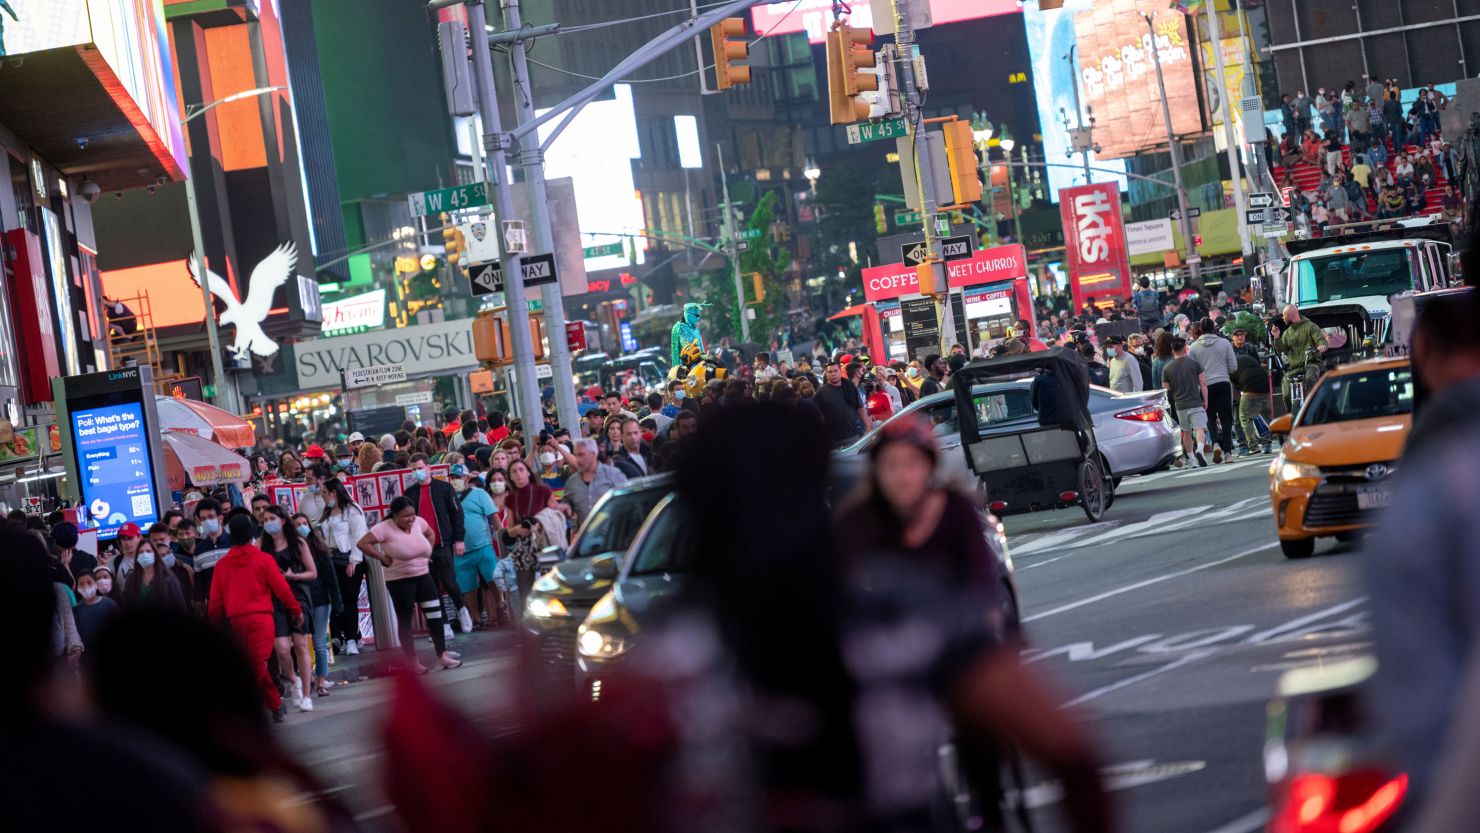 Crowds of people, mostly without masks, fill New York's Times Square on June 12. New York is among many states to pull back on Covid-19 restrictions in recent weeks.